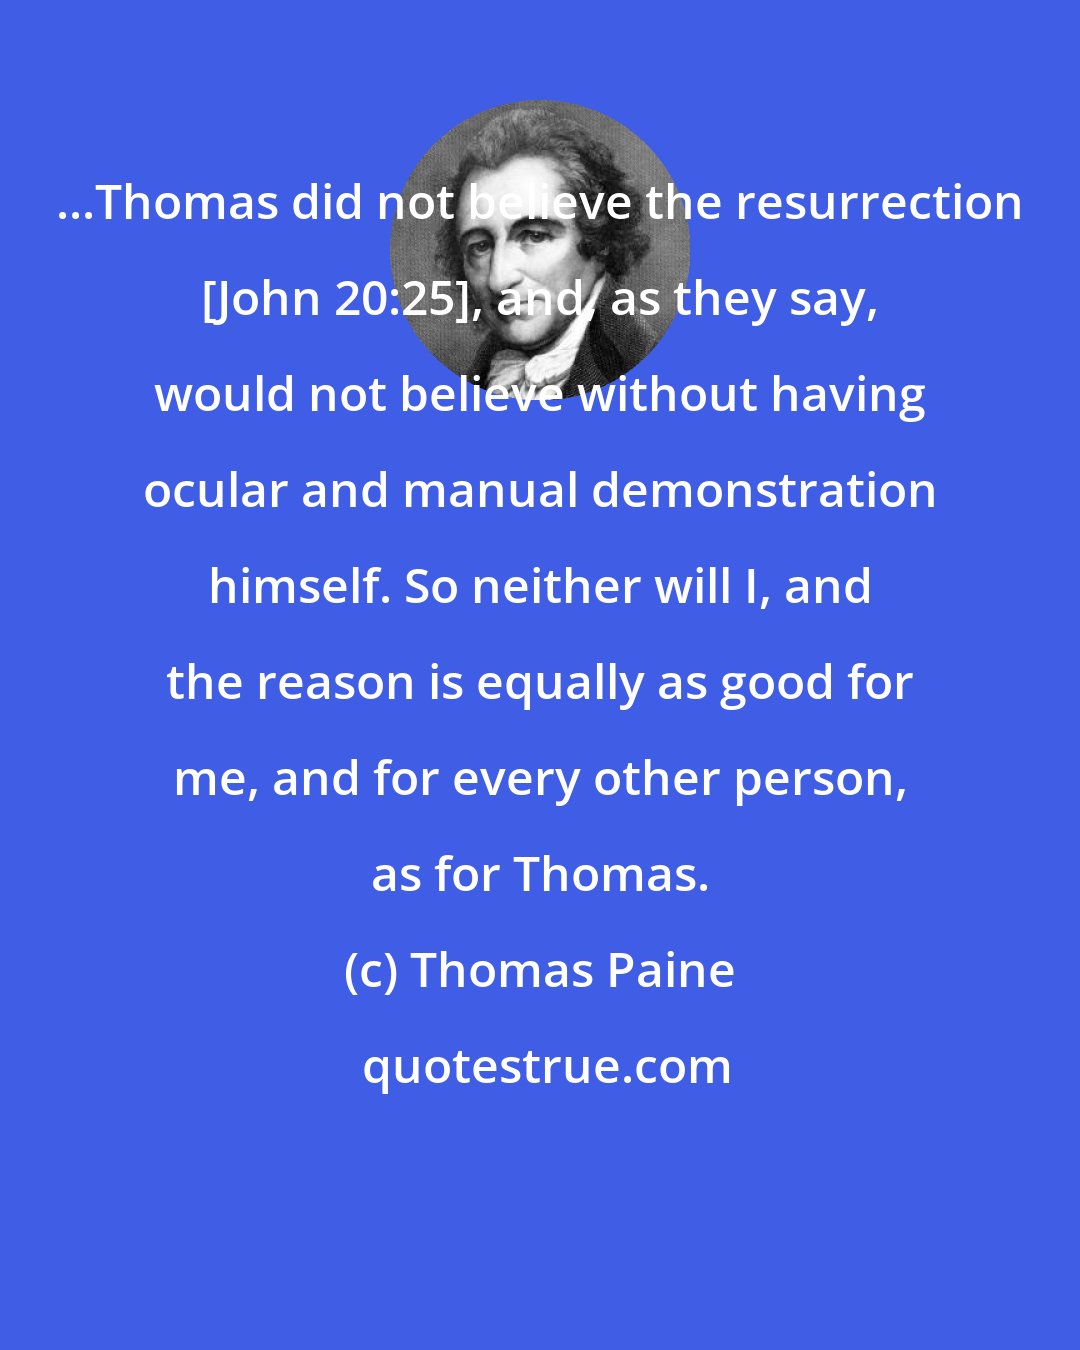 Thomas Paine: ...Thomas did not believe the resurrection [John 20:25], and, as they say, would not believe without having ocular and manual demonstration himself. So neither will I, and the reason is equally as good for me, and for every other person, as for Thomas.